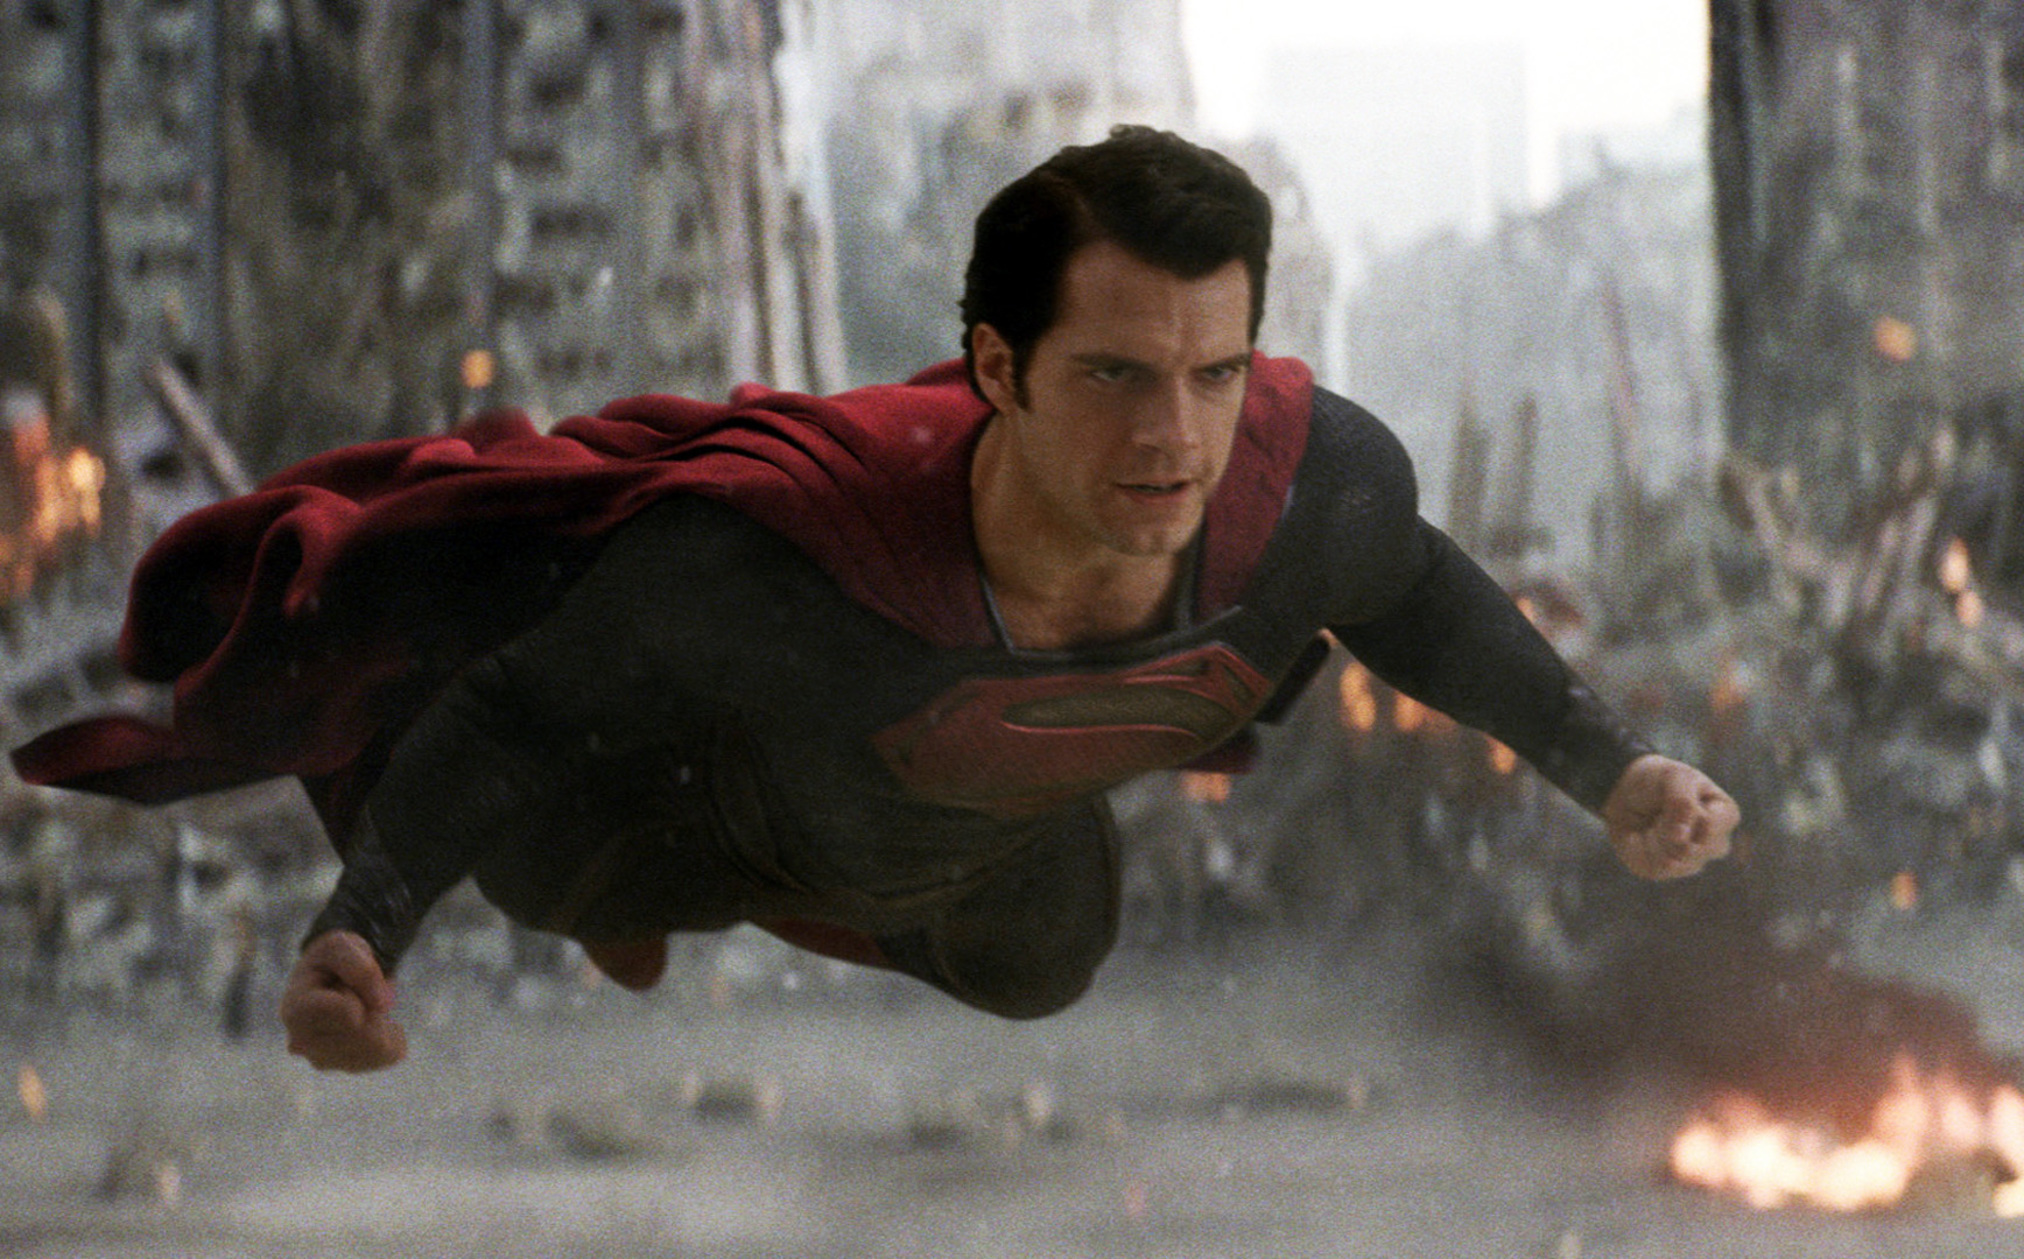 Henry Cavill as Superman HD wallpapers free download